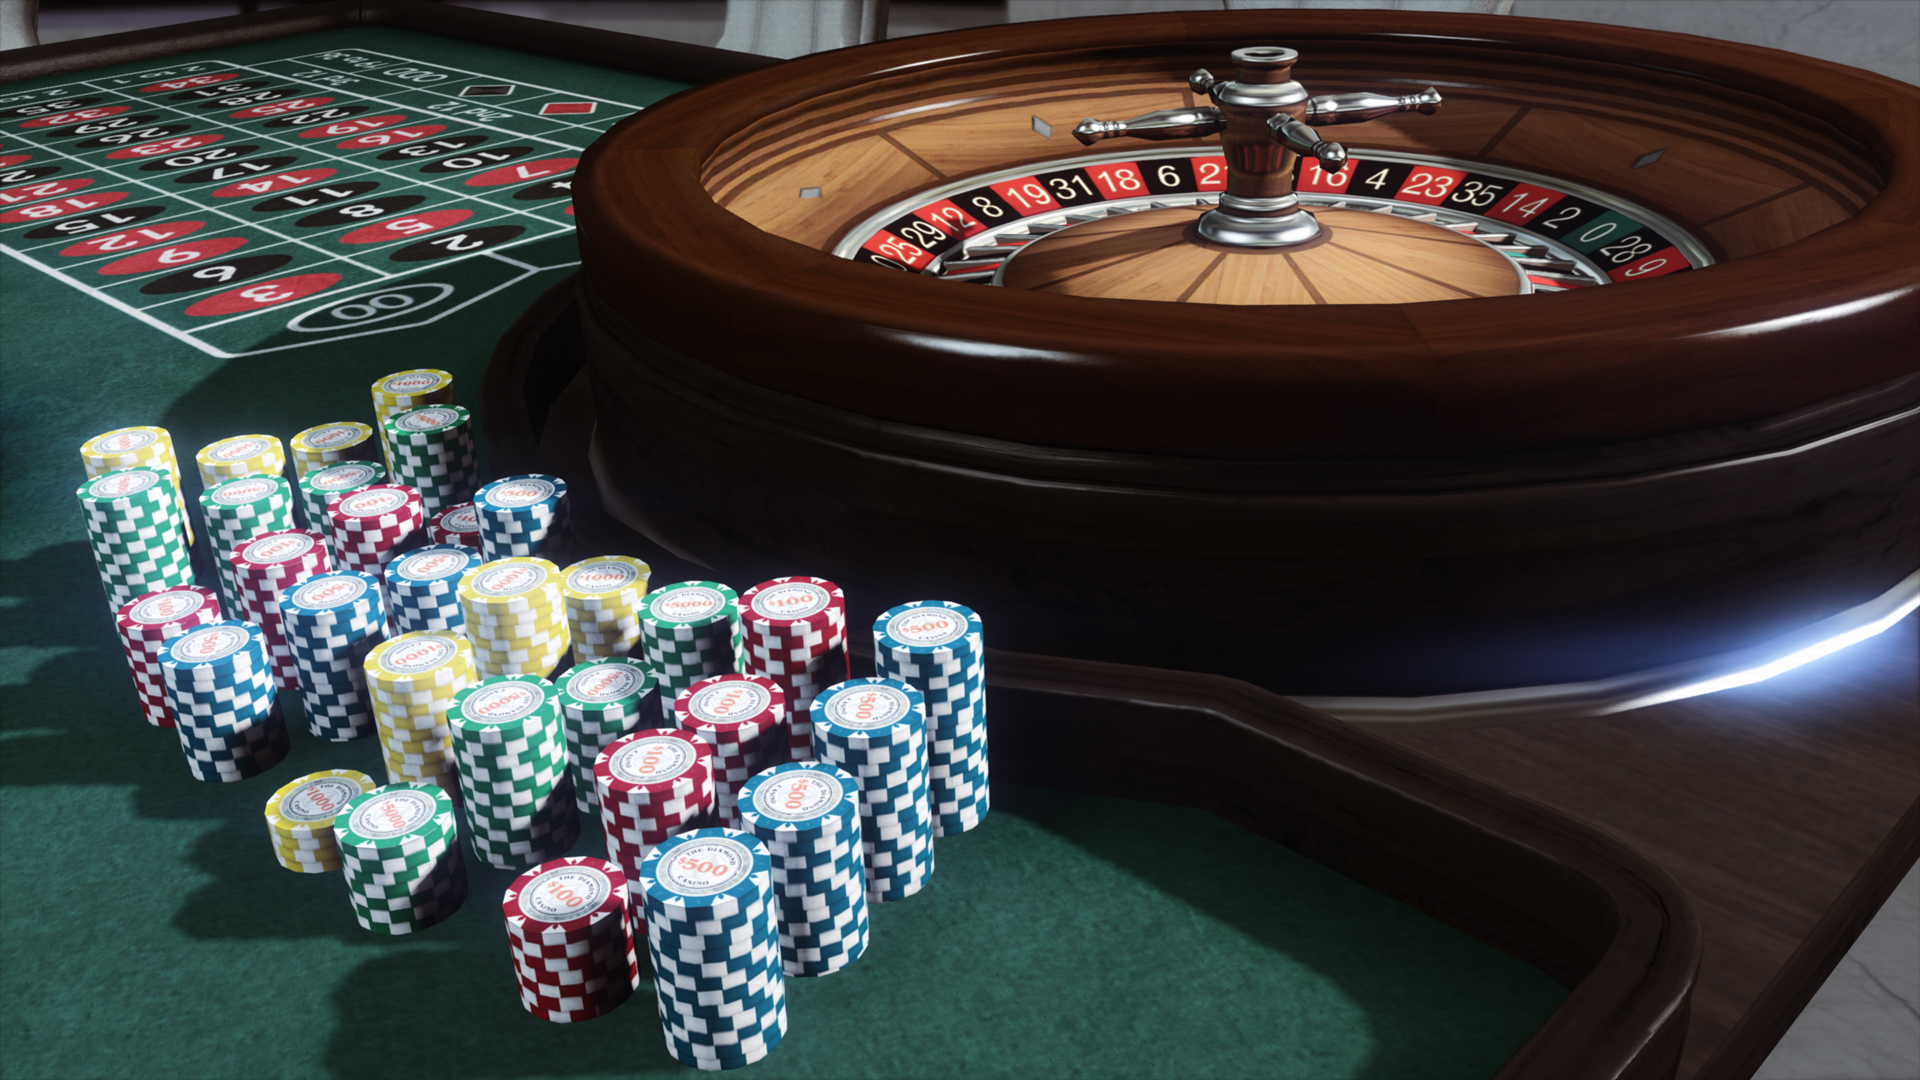 How to make money easily and quickly: the case of roulette, luck or expertise?